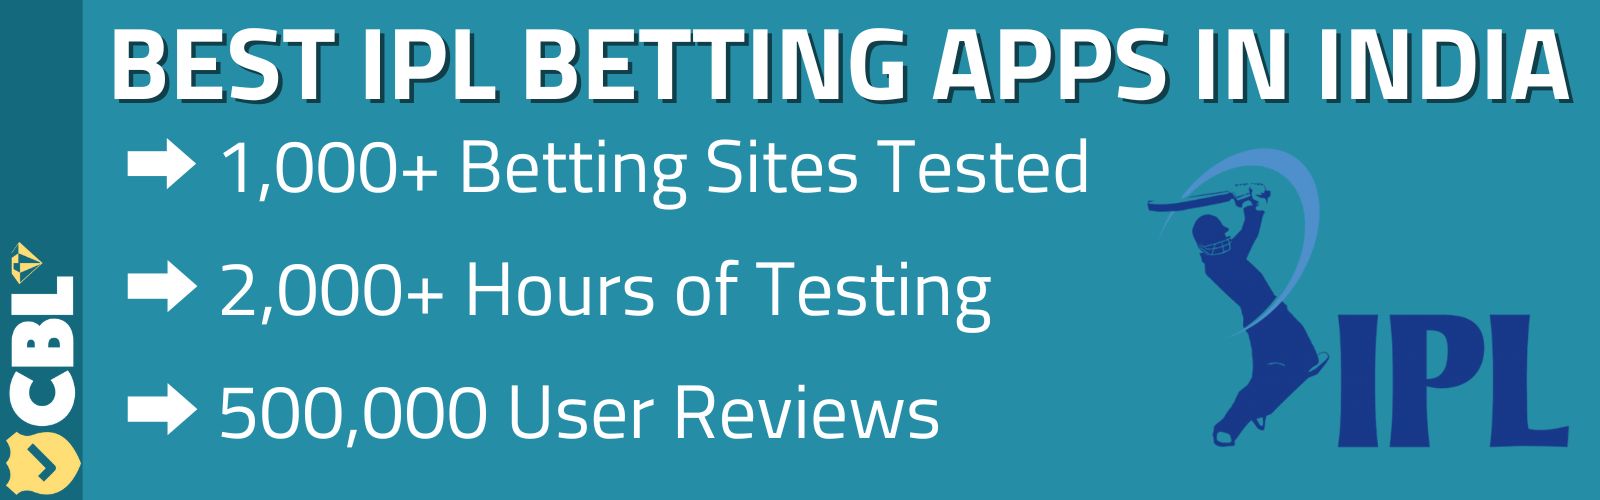 5 Habits Of Highly Effective Best Online Betting Apps